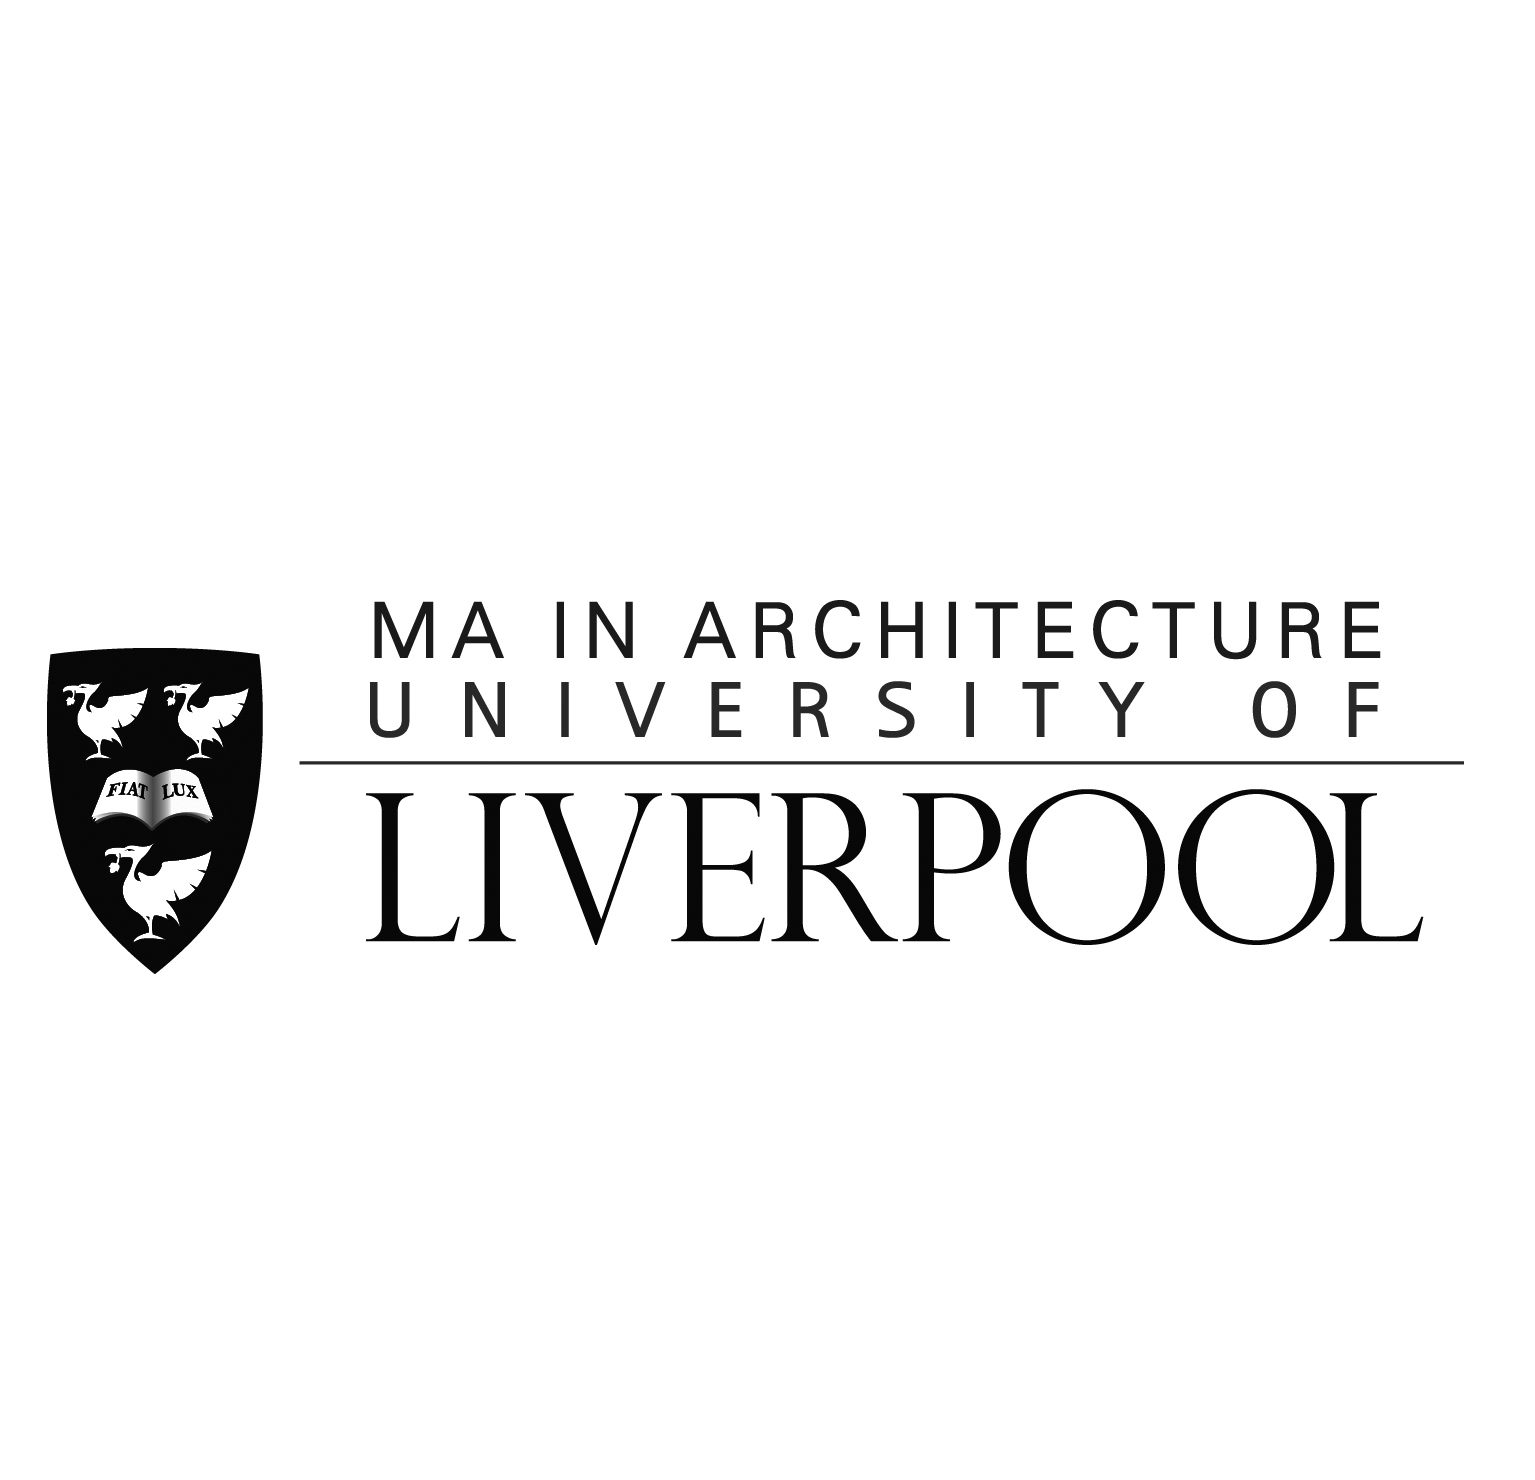 MA in Architecture website launched!